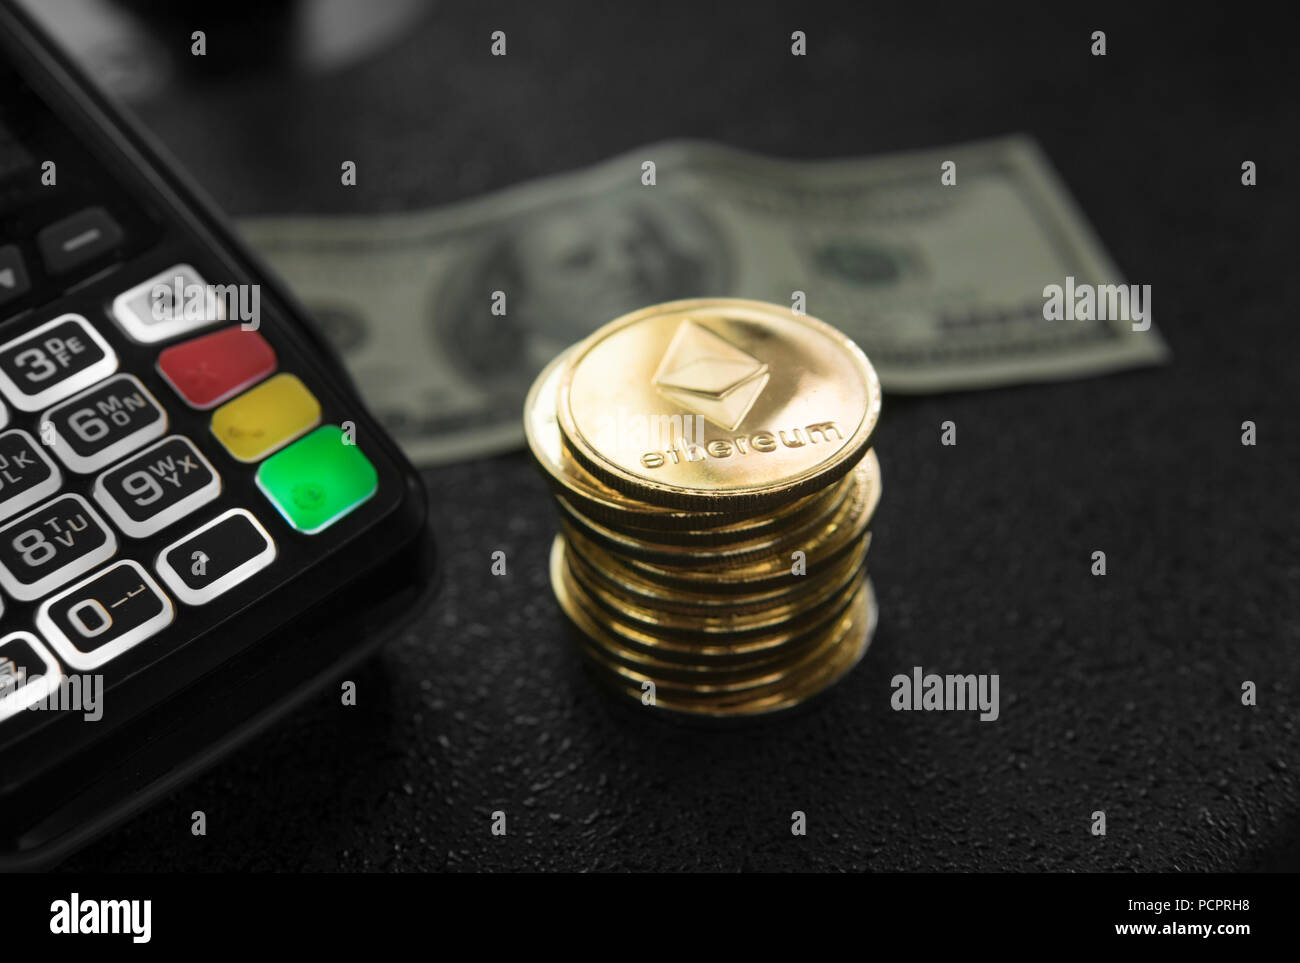 A pile of gold Ethereum coins and POS terminal with a hindred dollar  banknote on a background. Ethereums Cryptocurrency. E-commerce, business,  finance concept, banking and paymant Stock Photo - Alamy